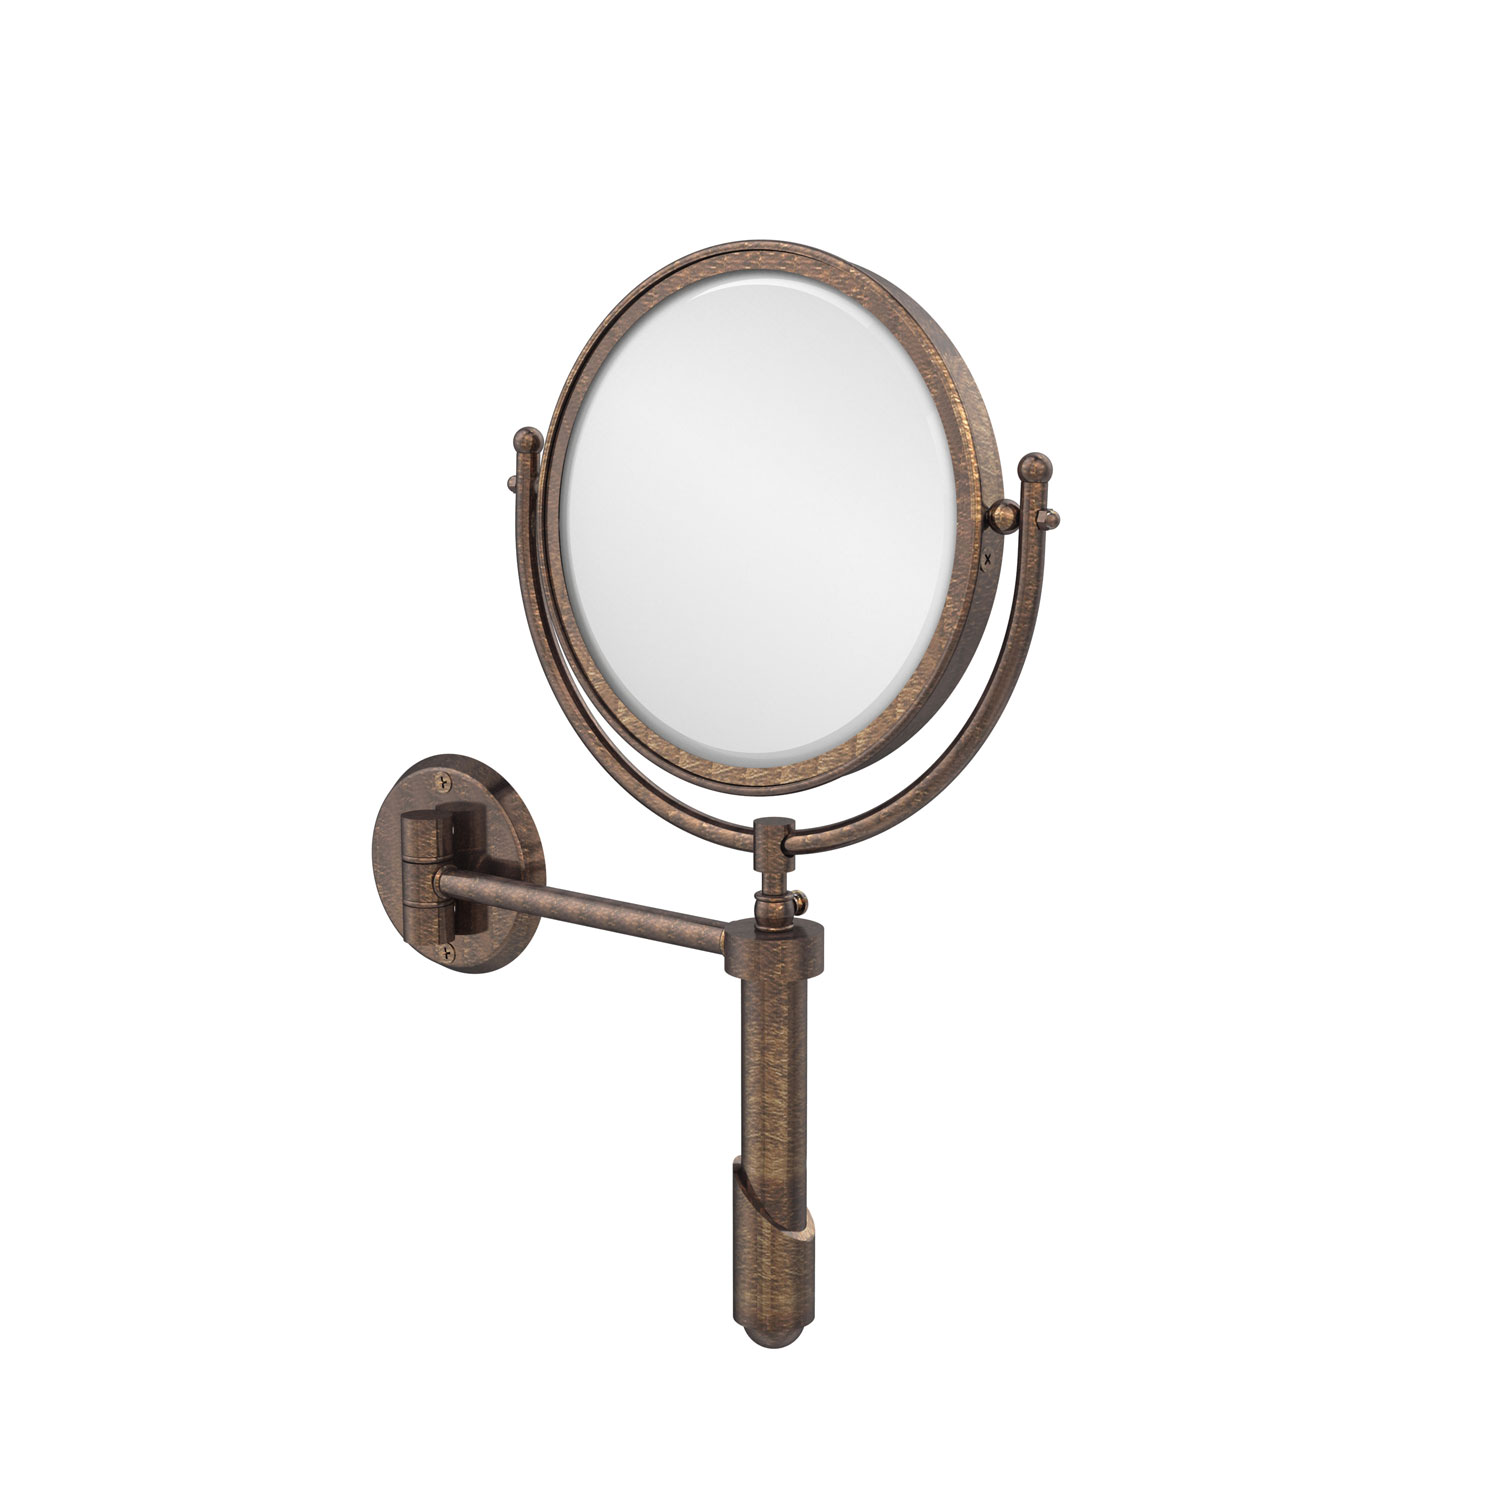 Soho Collection Wall Mounted Make-Up Mirror 8 Inch Diameter With 3X Magnification, Venetian Bronze